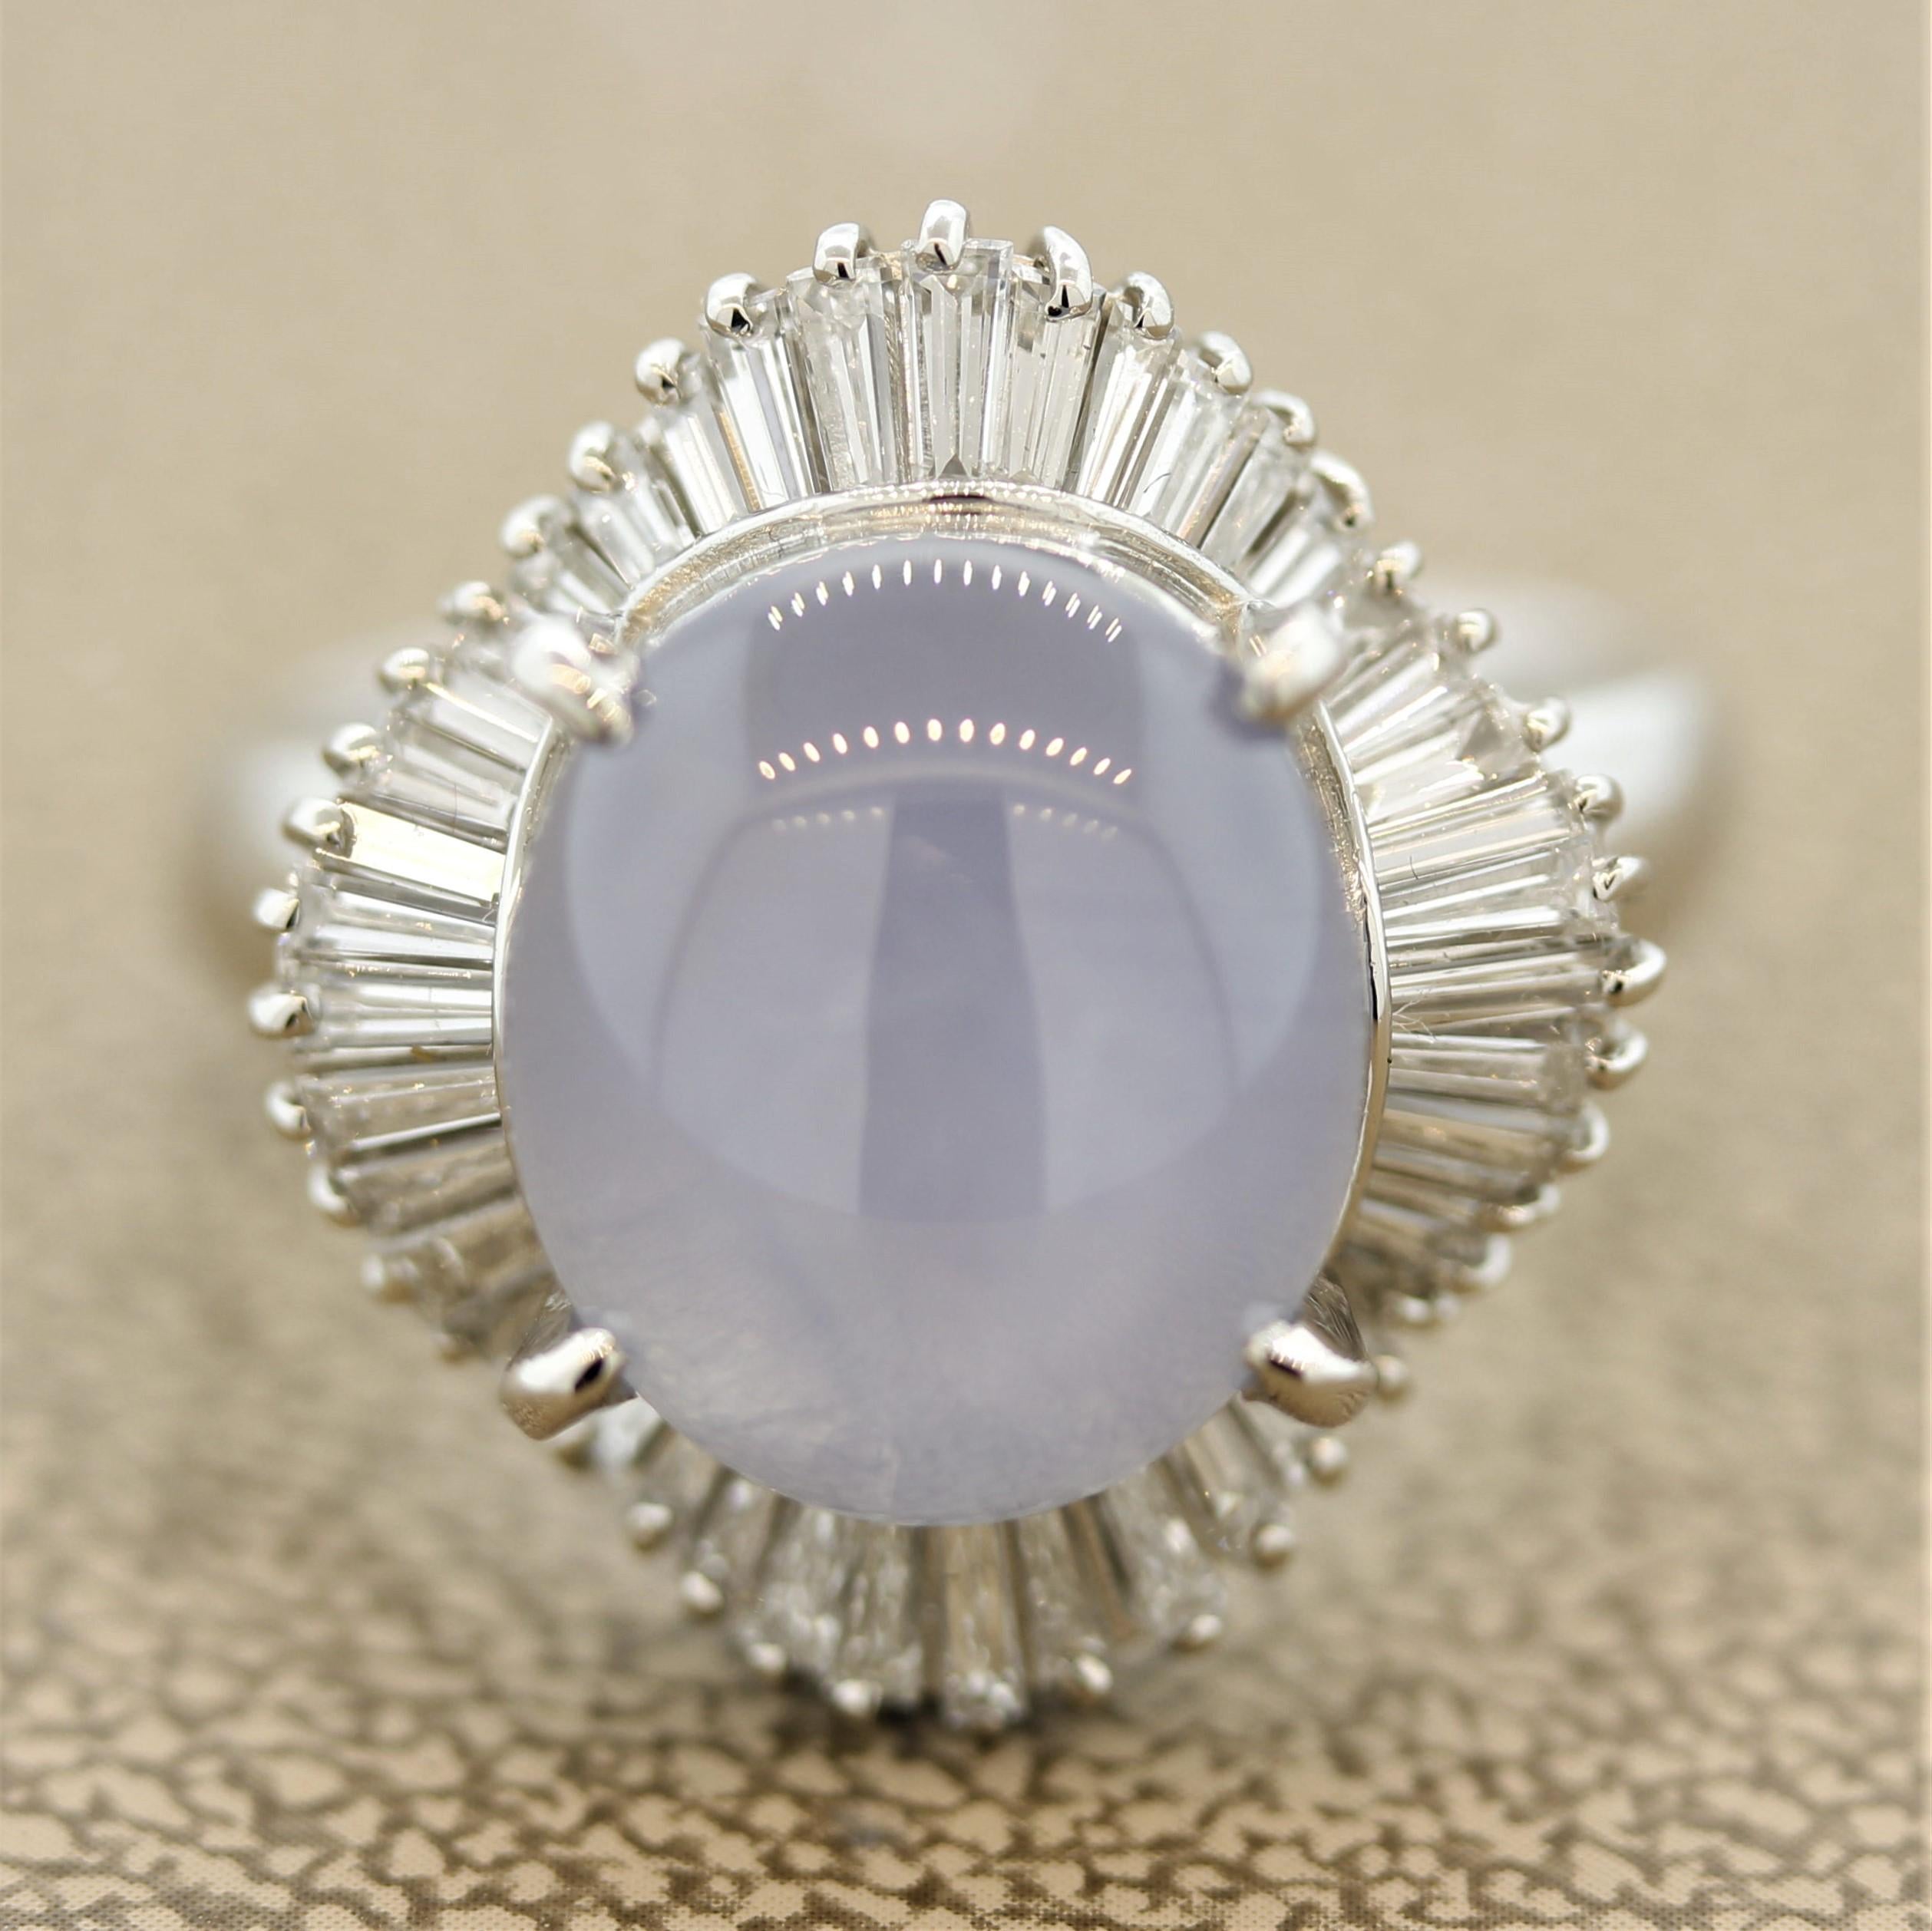 A classic ballerina styled ring featuring a 9.20 carat star sapphire. It has a soft blue color and when a light shines on the stone a six rayed star can be seen on it (called asterism). It is accented by 0.95 carats of baguette cut diamonds which